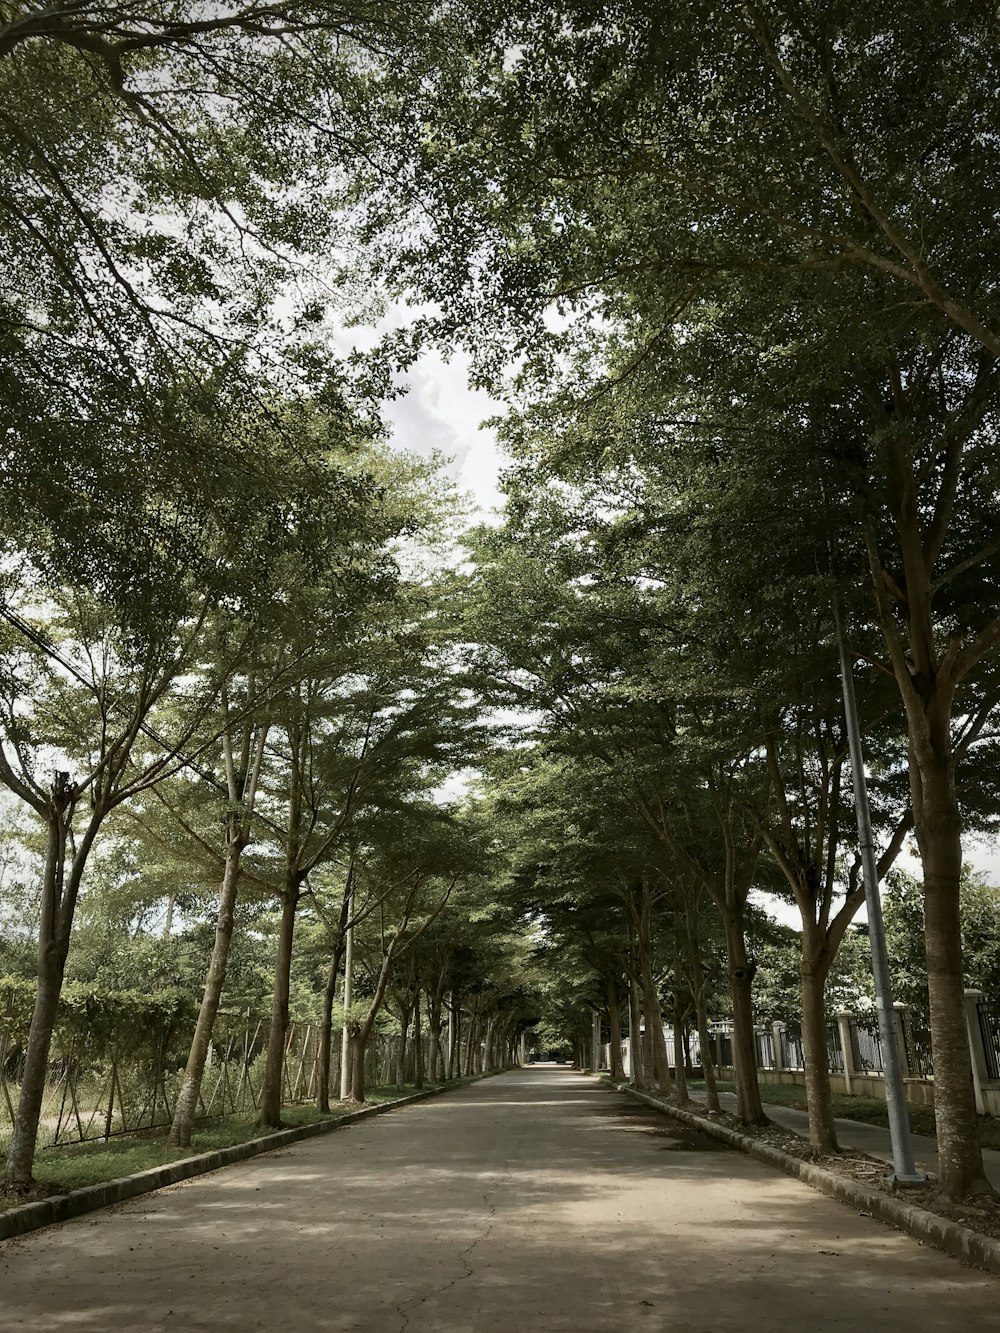 an empty street lined with trees on both sides